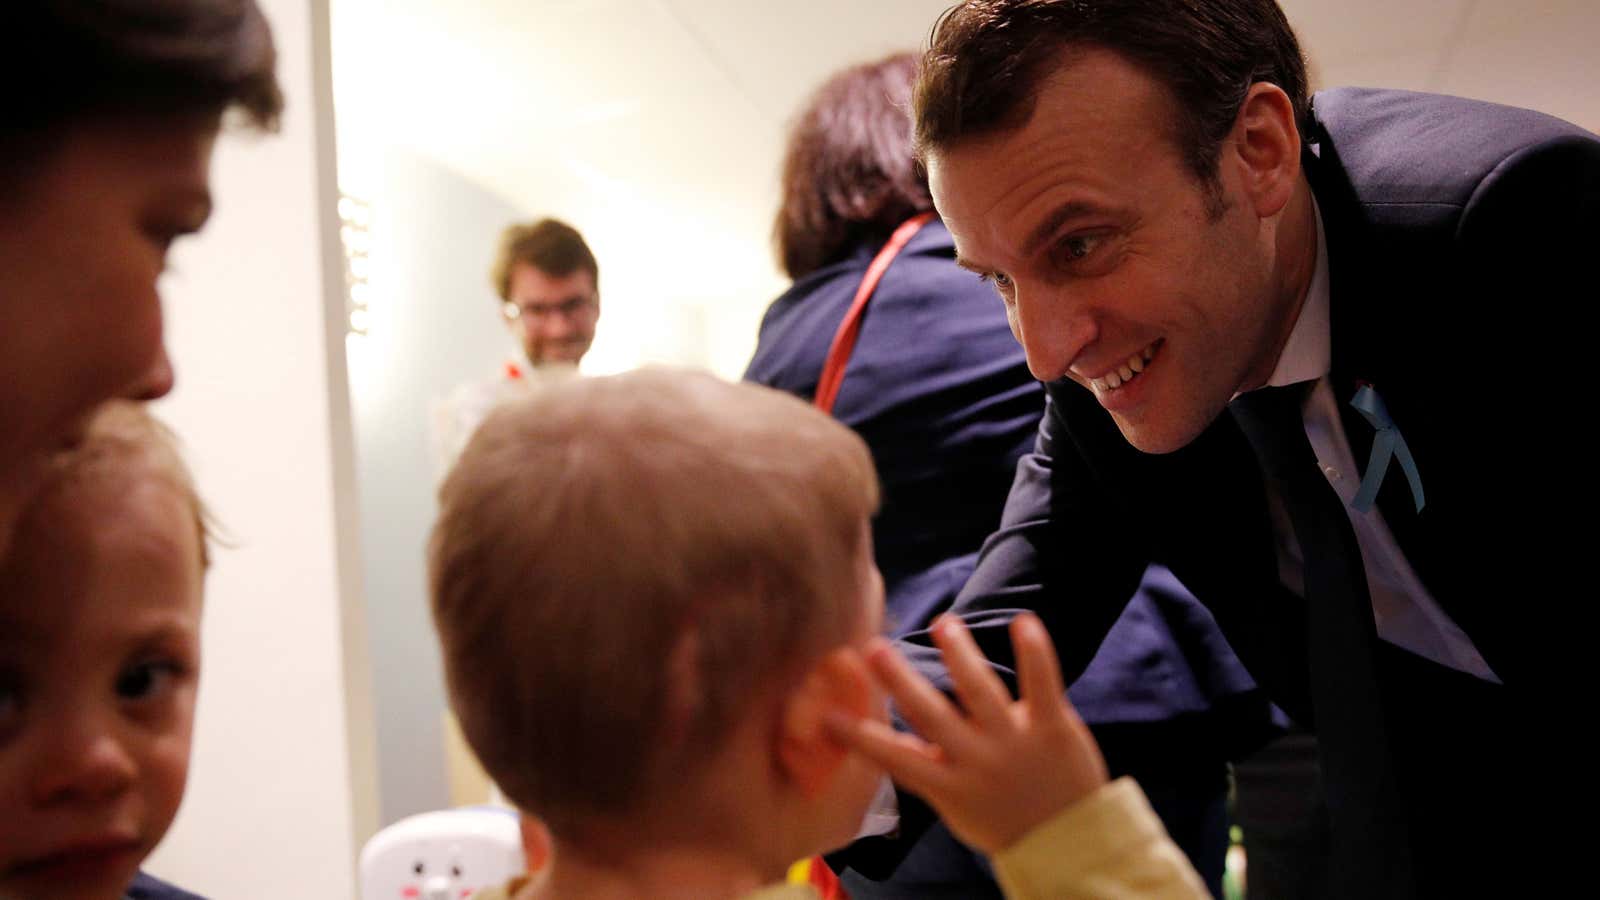 A new autism strategy has just been launched by French president Emmanuel Macron.